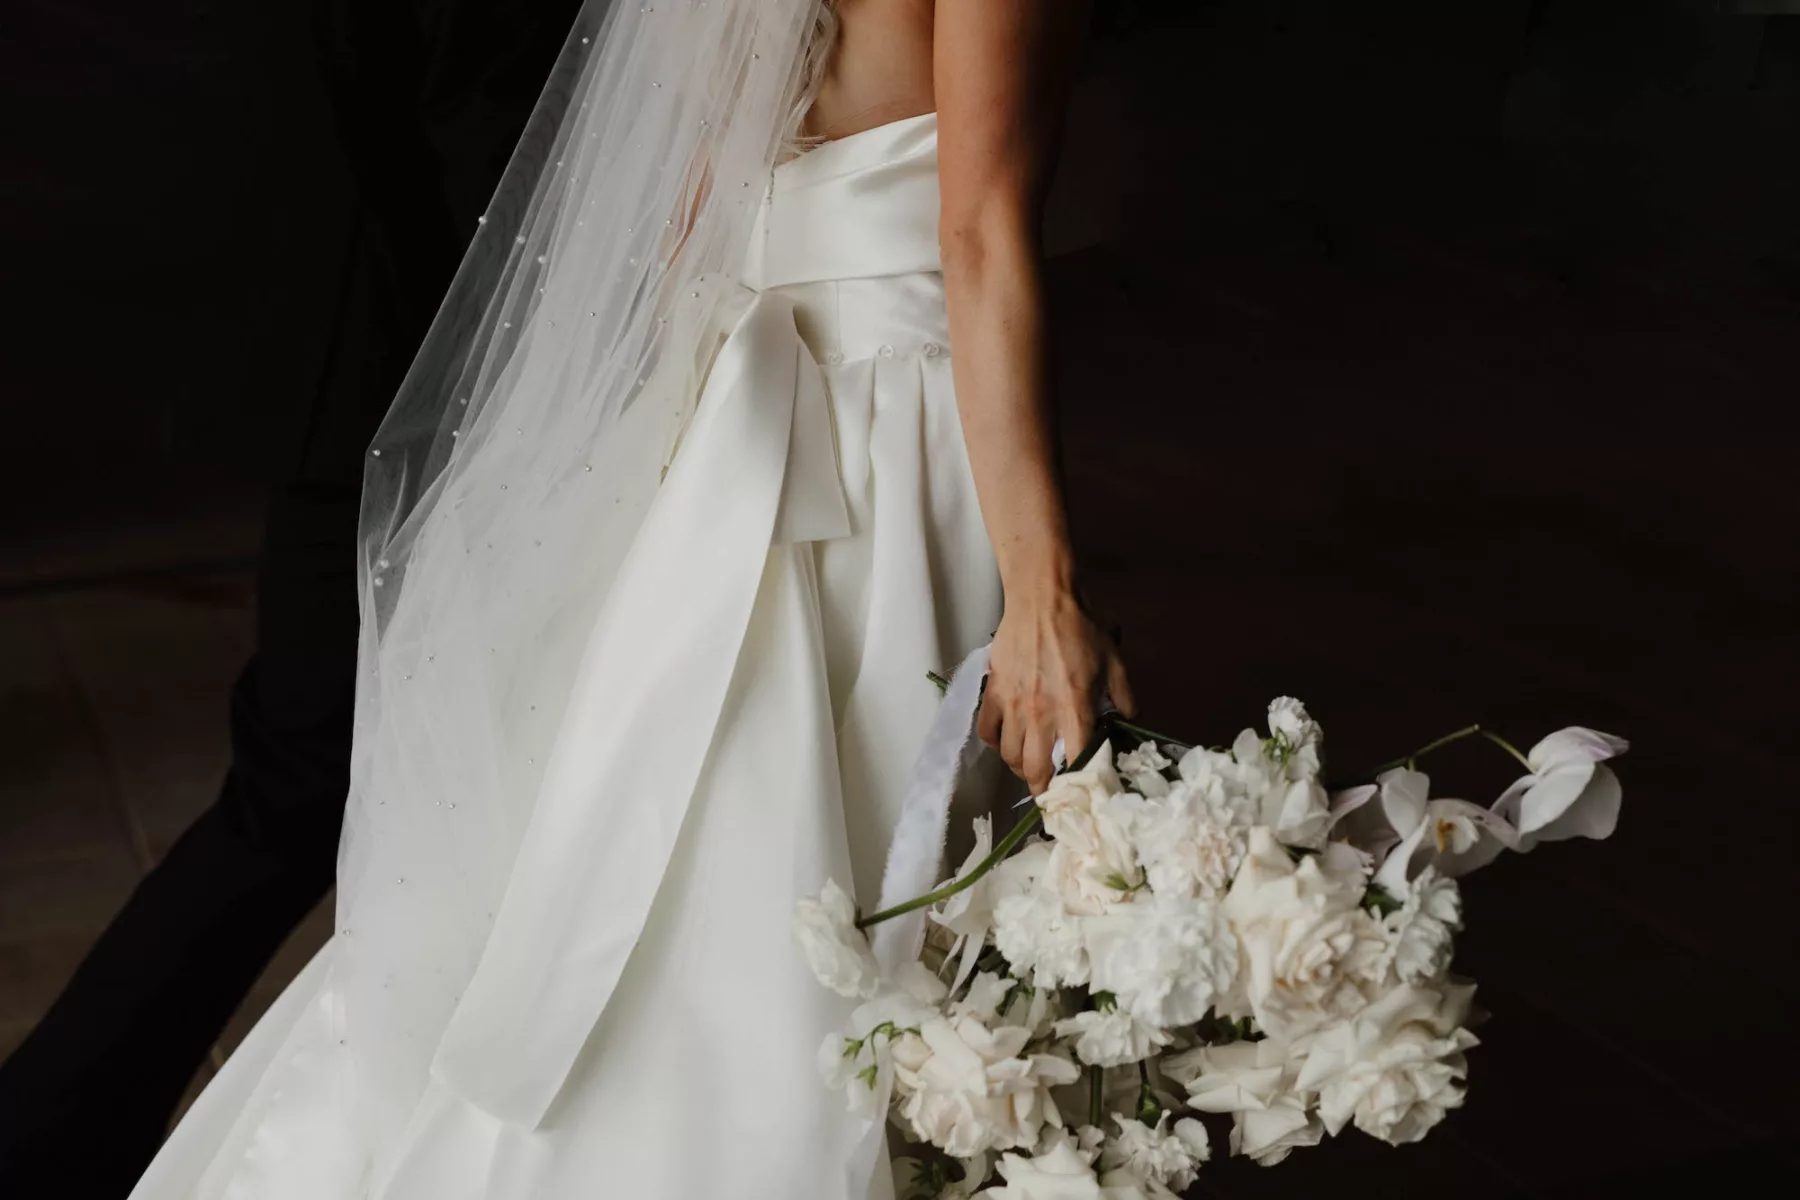 White Orchid and Rose Bridal Bouquet Ideas | Elegant Strapless Satin A-Line Eva Lendel Wedding Dress with Bow and Pearl Veil Inspiration